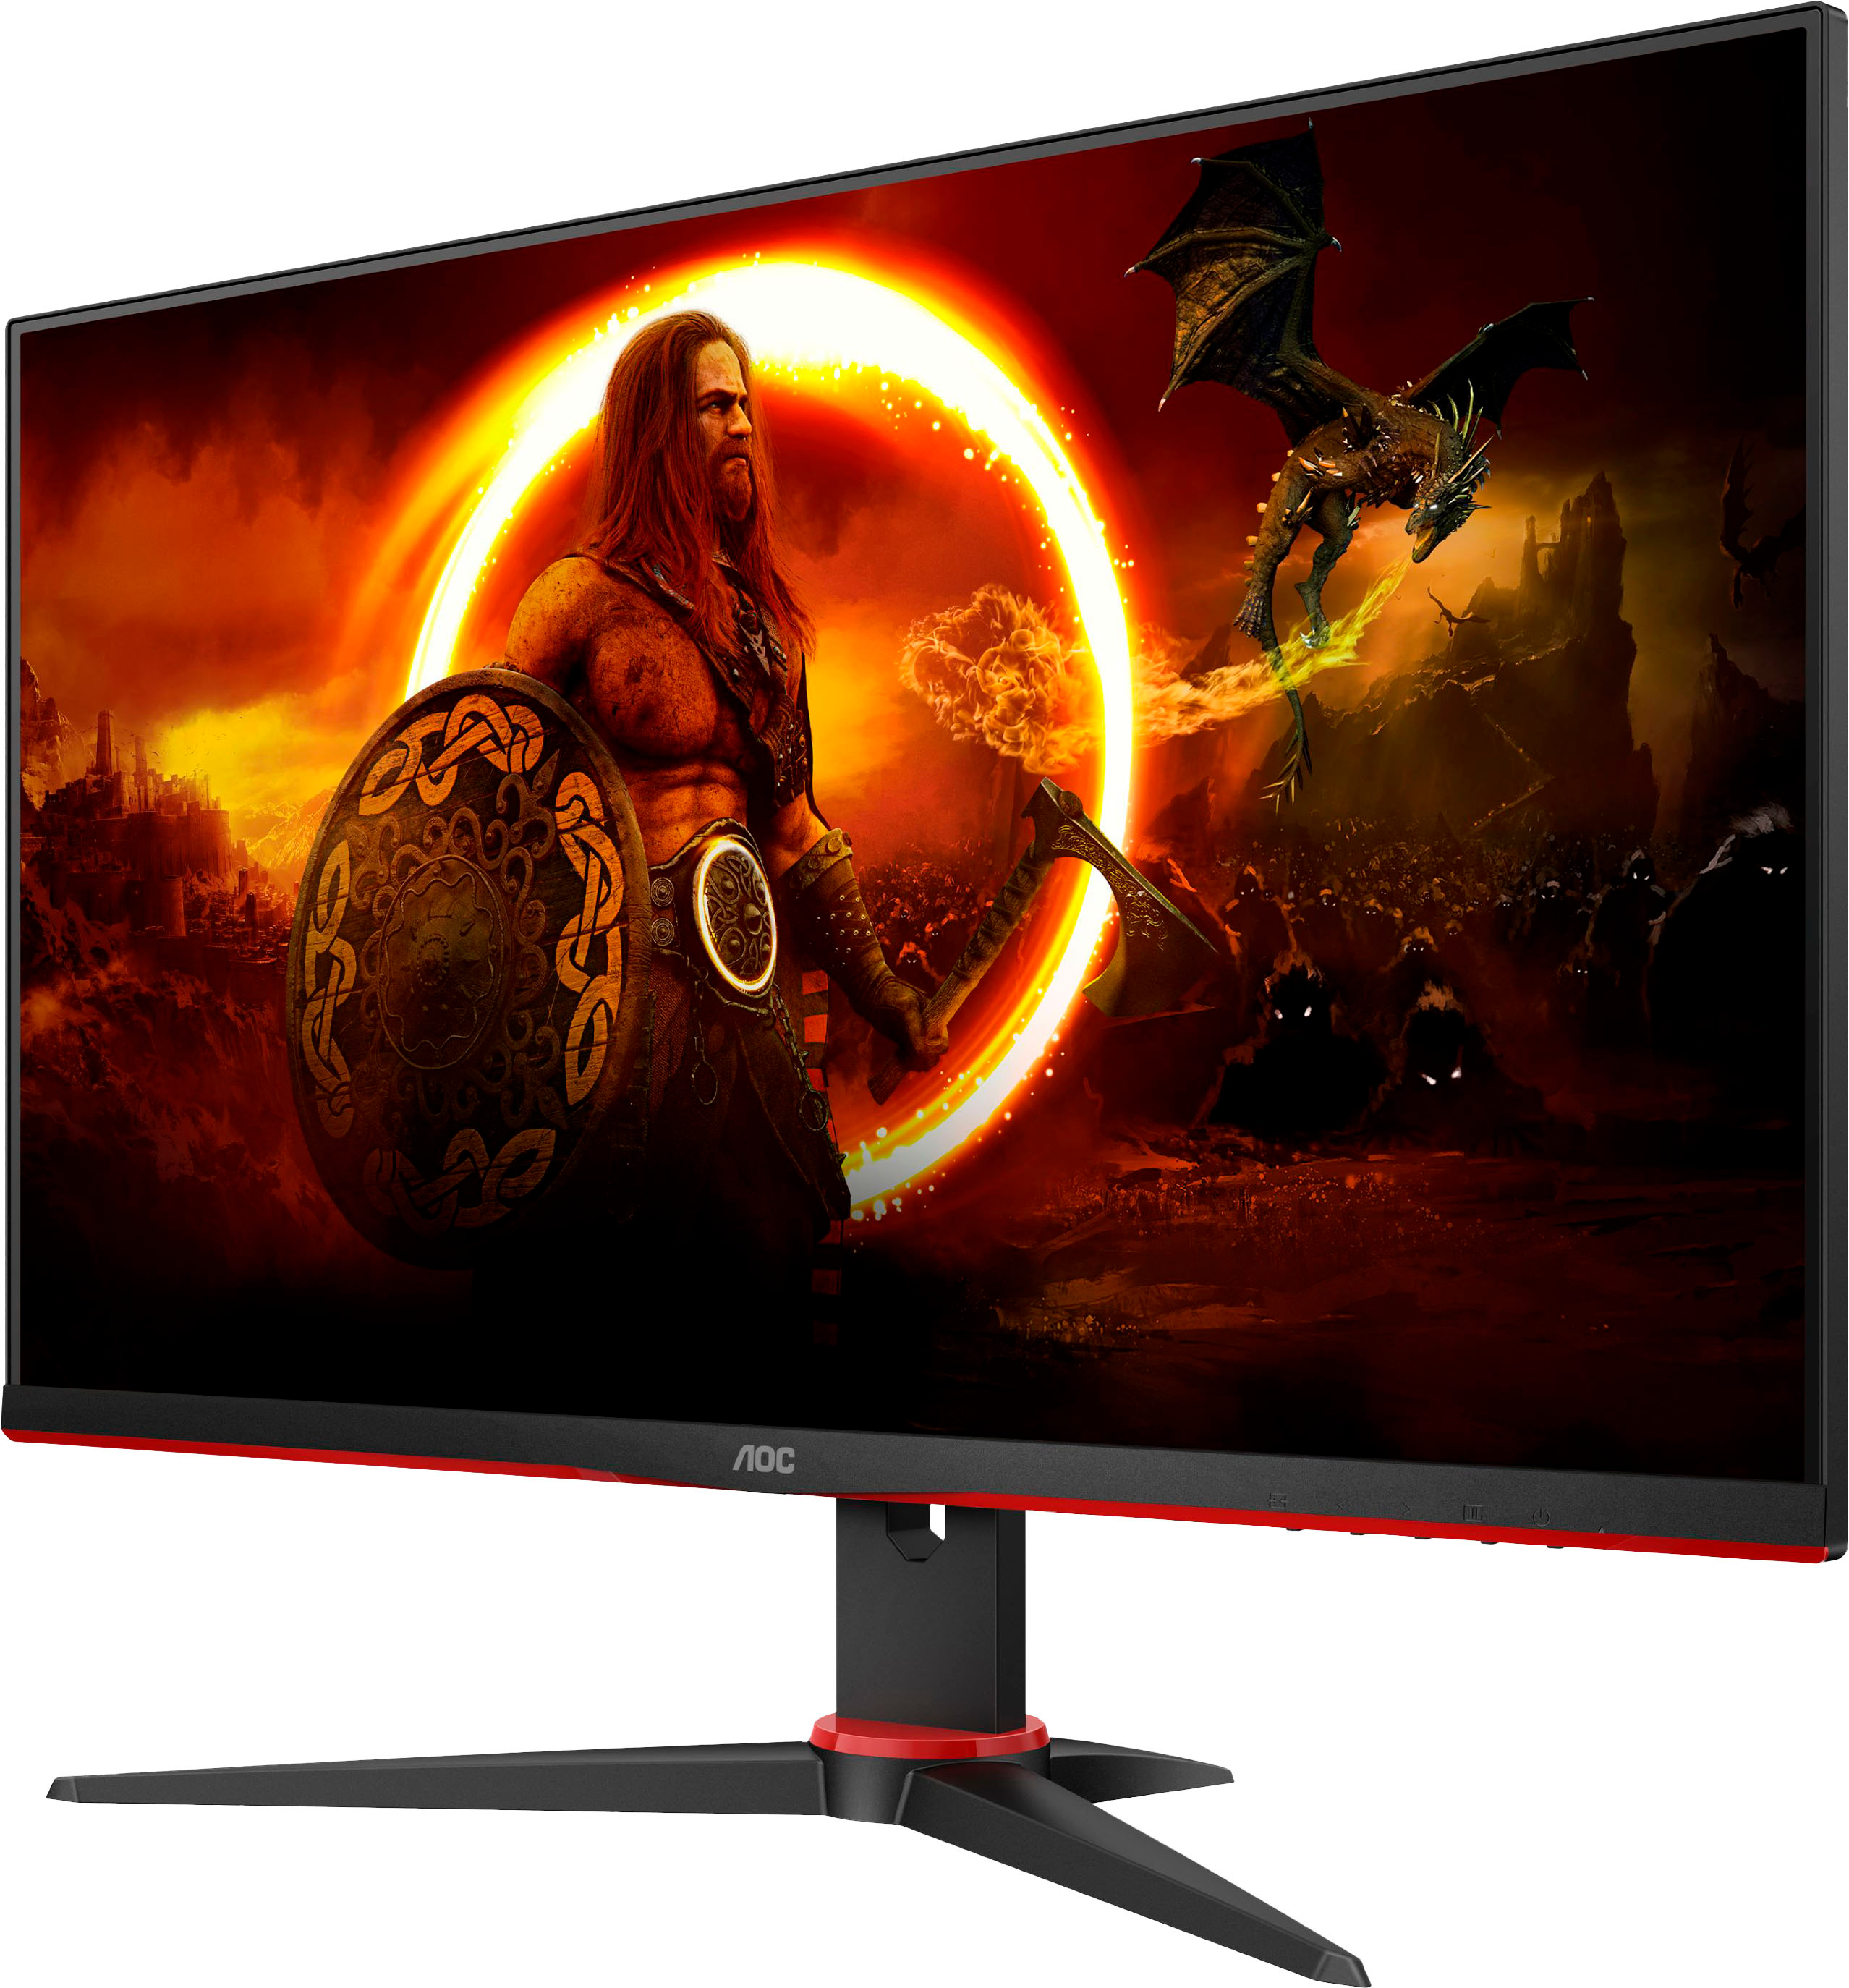 Left View: AOC - 24G2SPE 23.8" LCD FHD Gaming Monitor - Black/Red